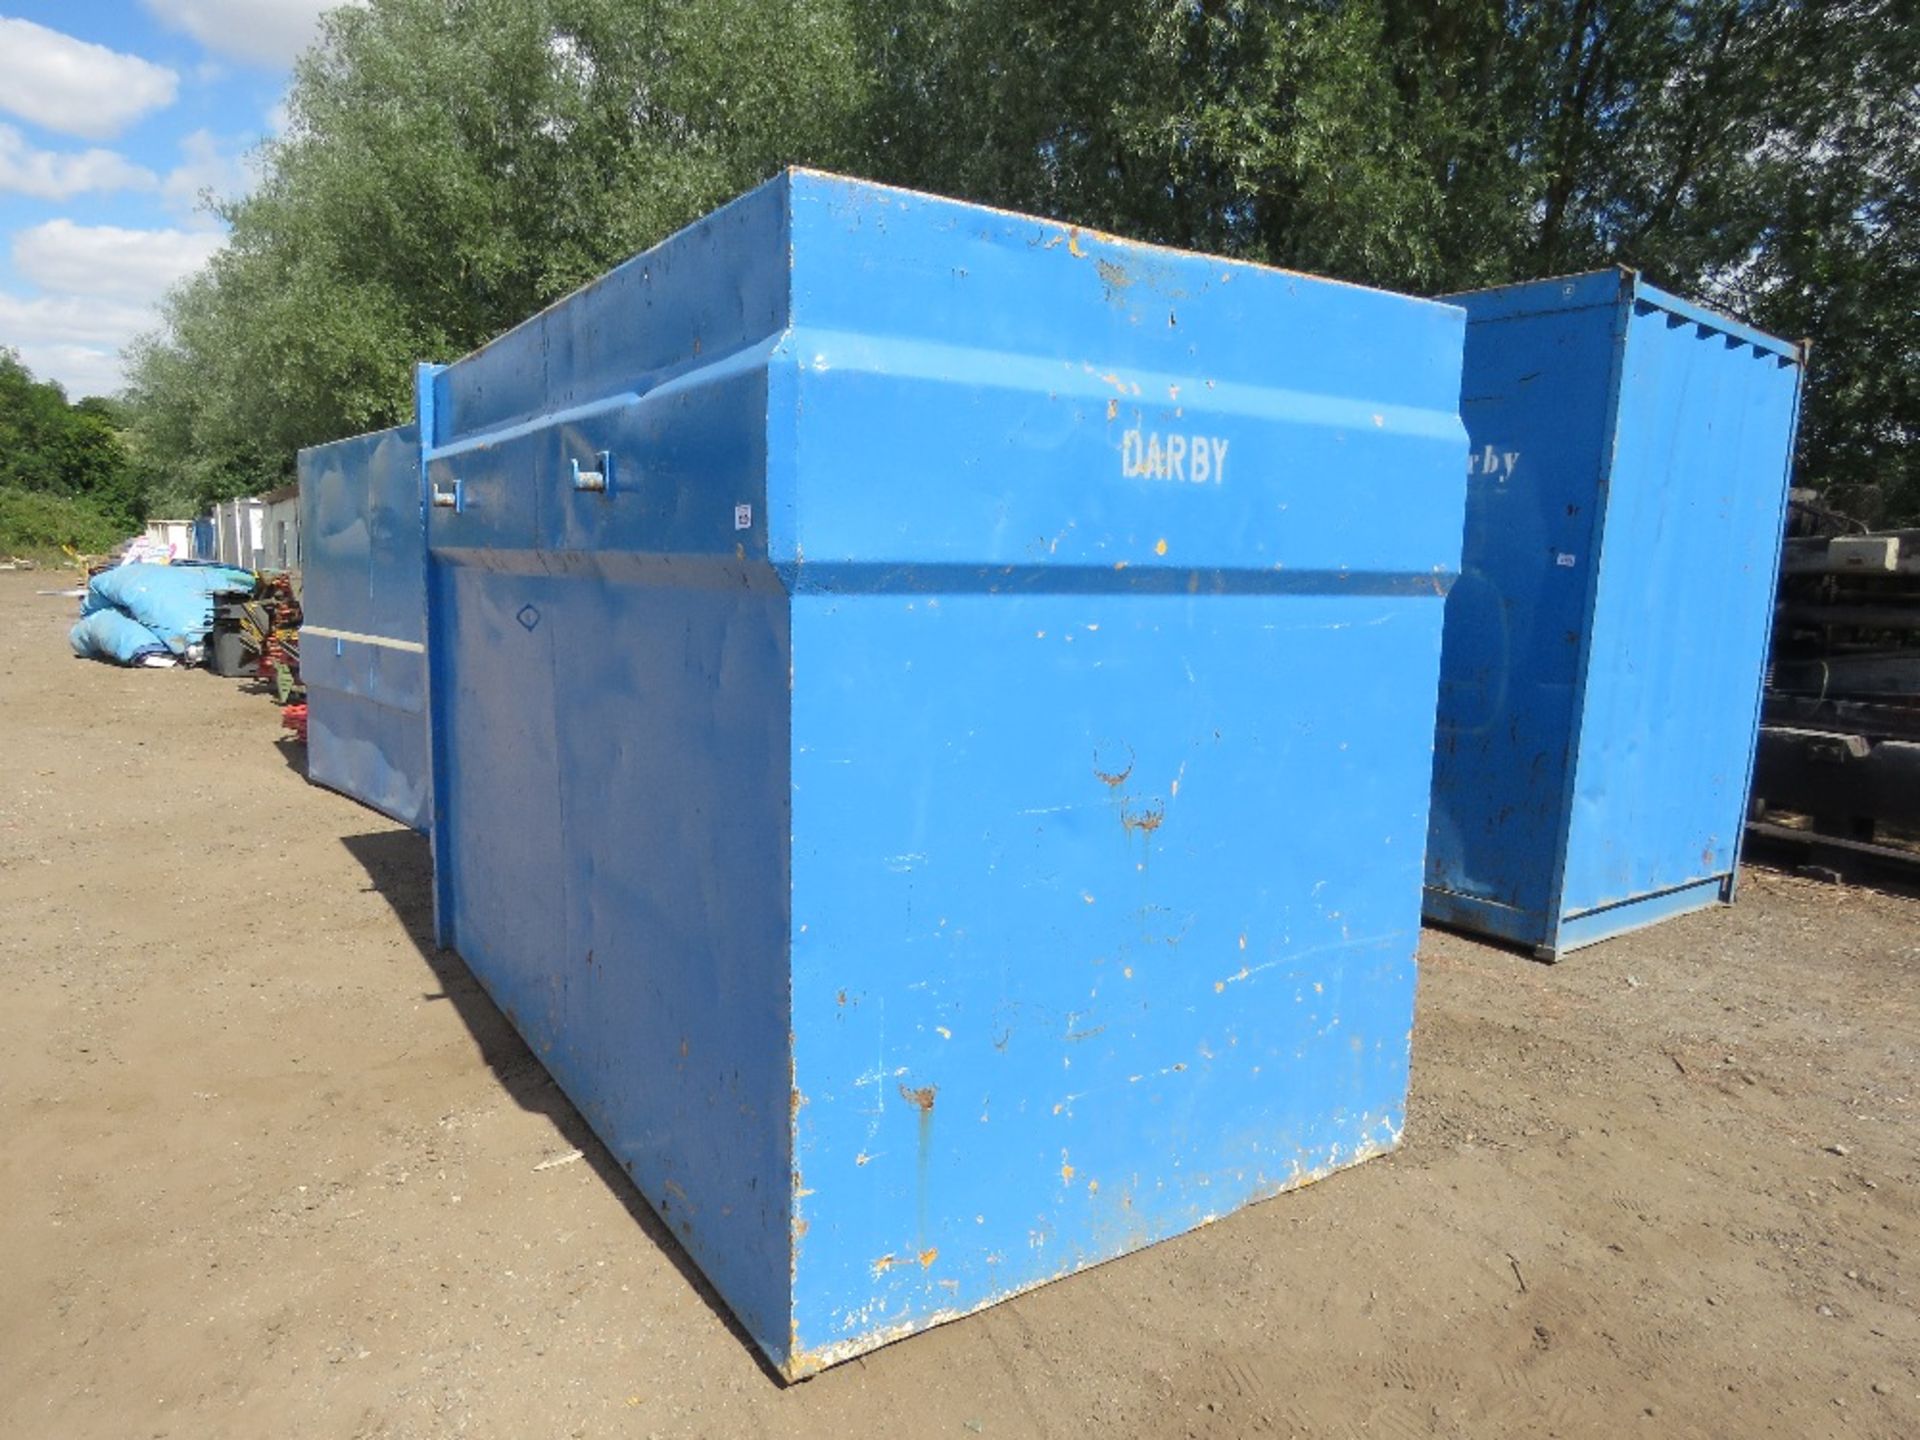 SKIP CHAIN LIFT ENCLOSED STEEL STORAGE CONTAINER 3M X 1.75M APPROX TS10 WITH KEYS. DIRECT FROM - Image 4 of 6